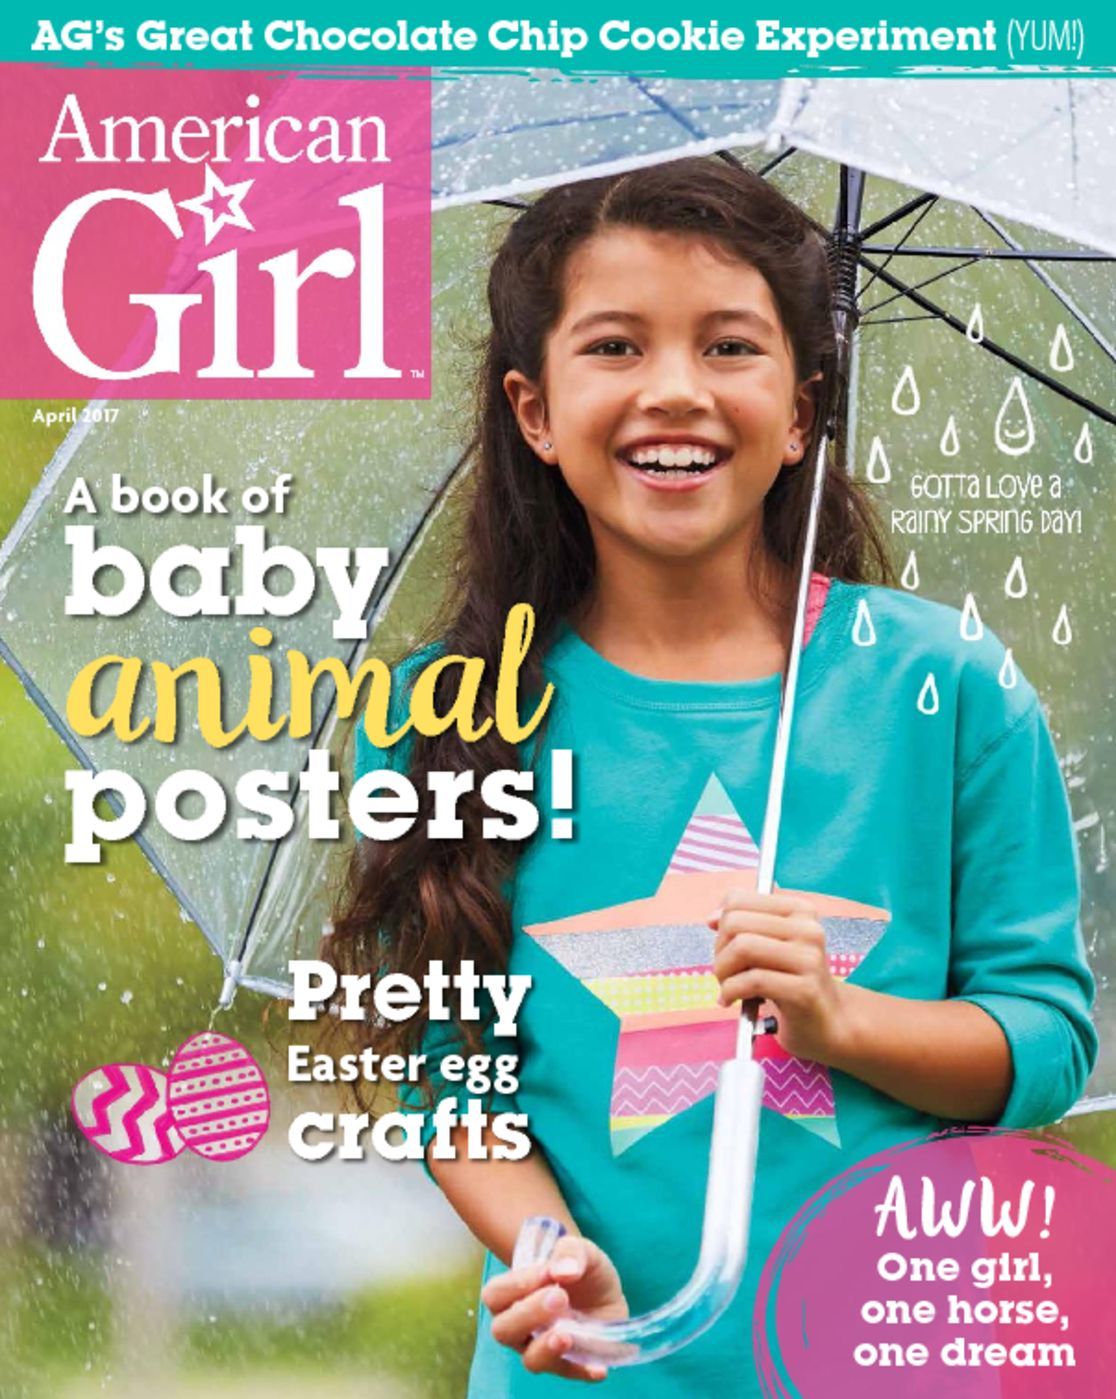 One Year Subscription To American Girl For 15 95 Through Tomorrow 3 24 Frugal Living Nw